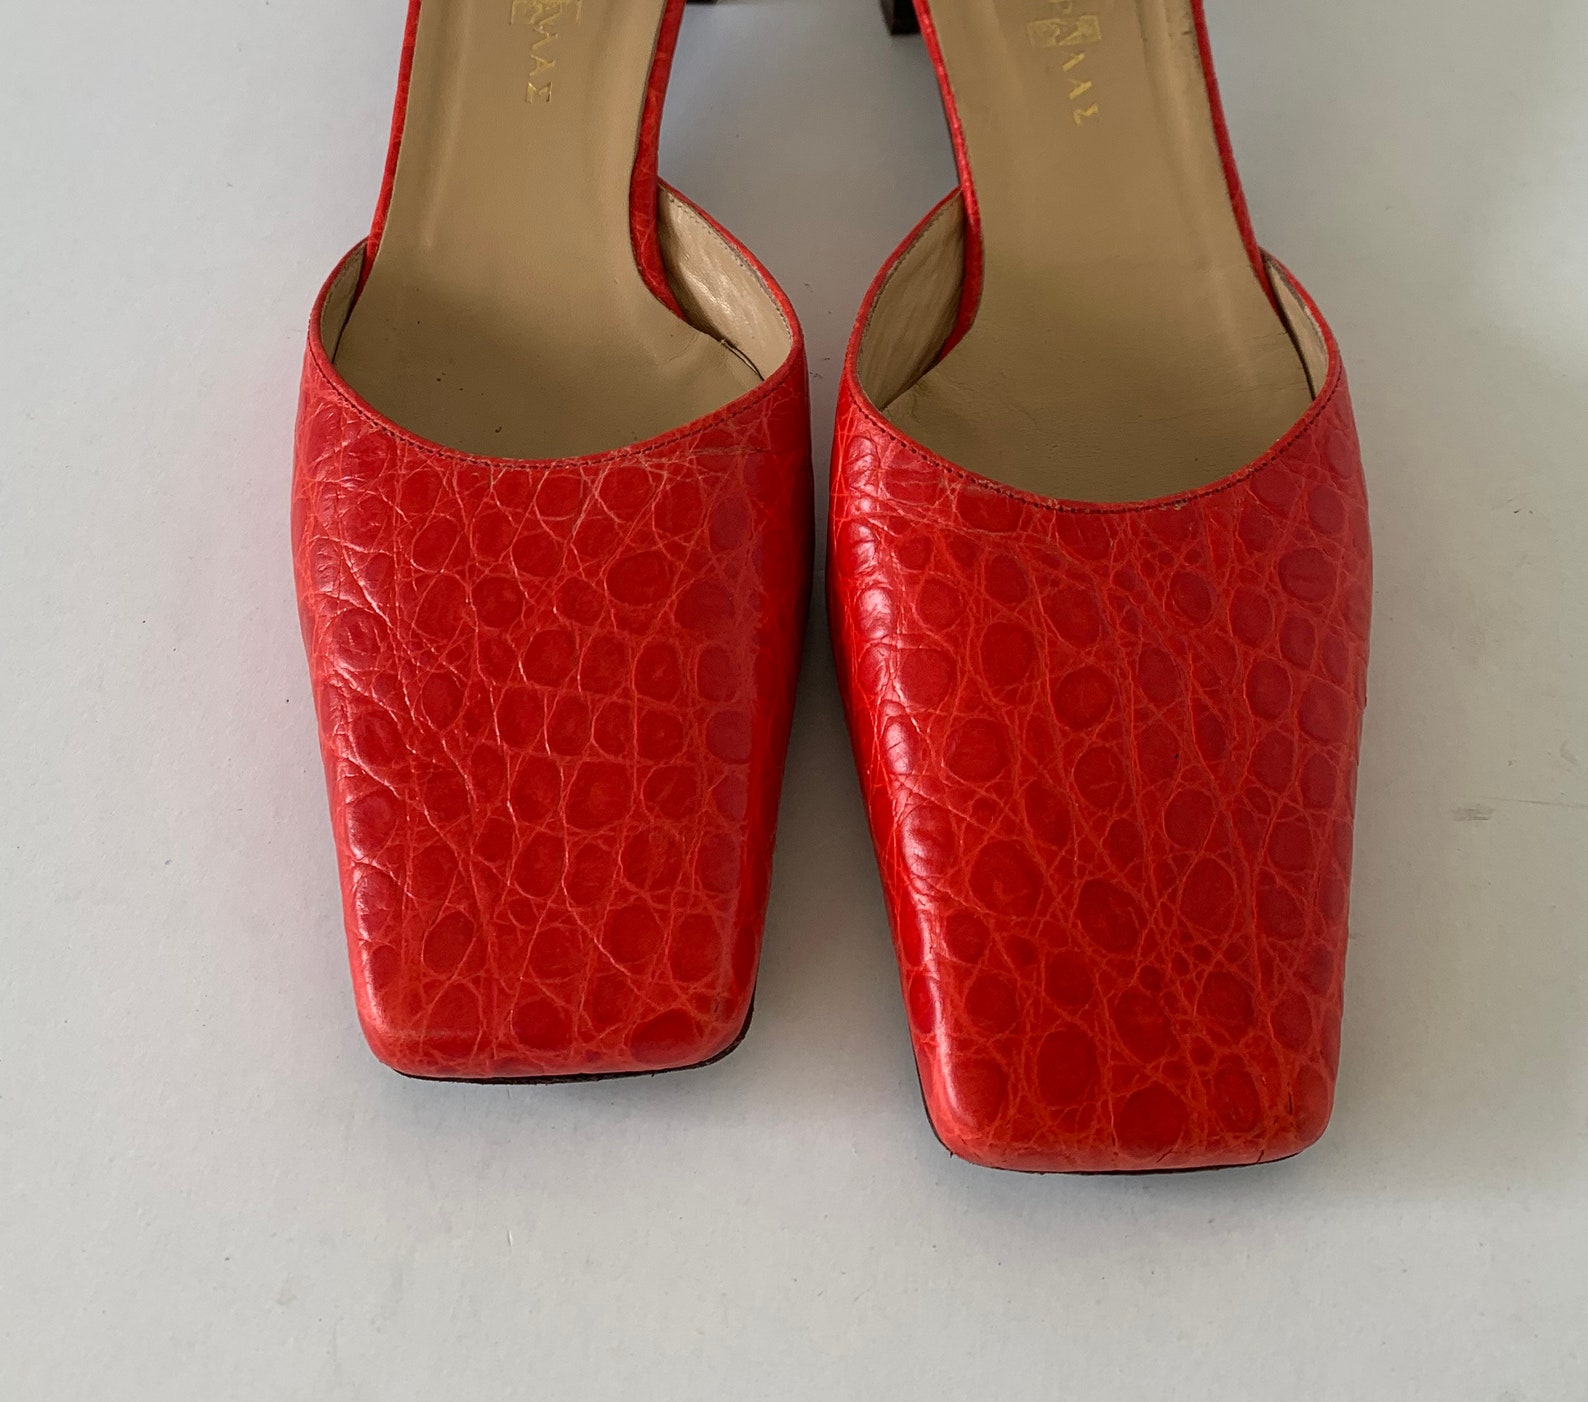 Vintage Red Croc-Embossed Leather Mules by Haralas | Etsy